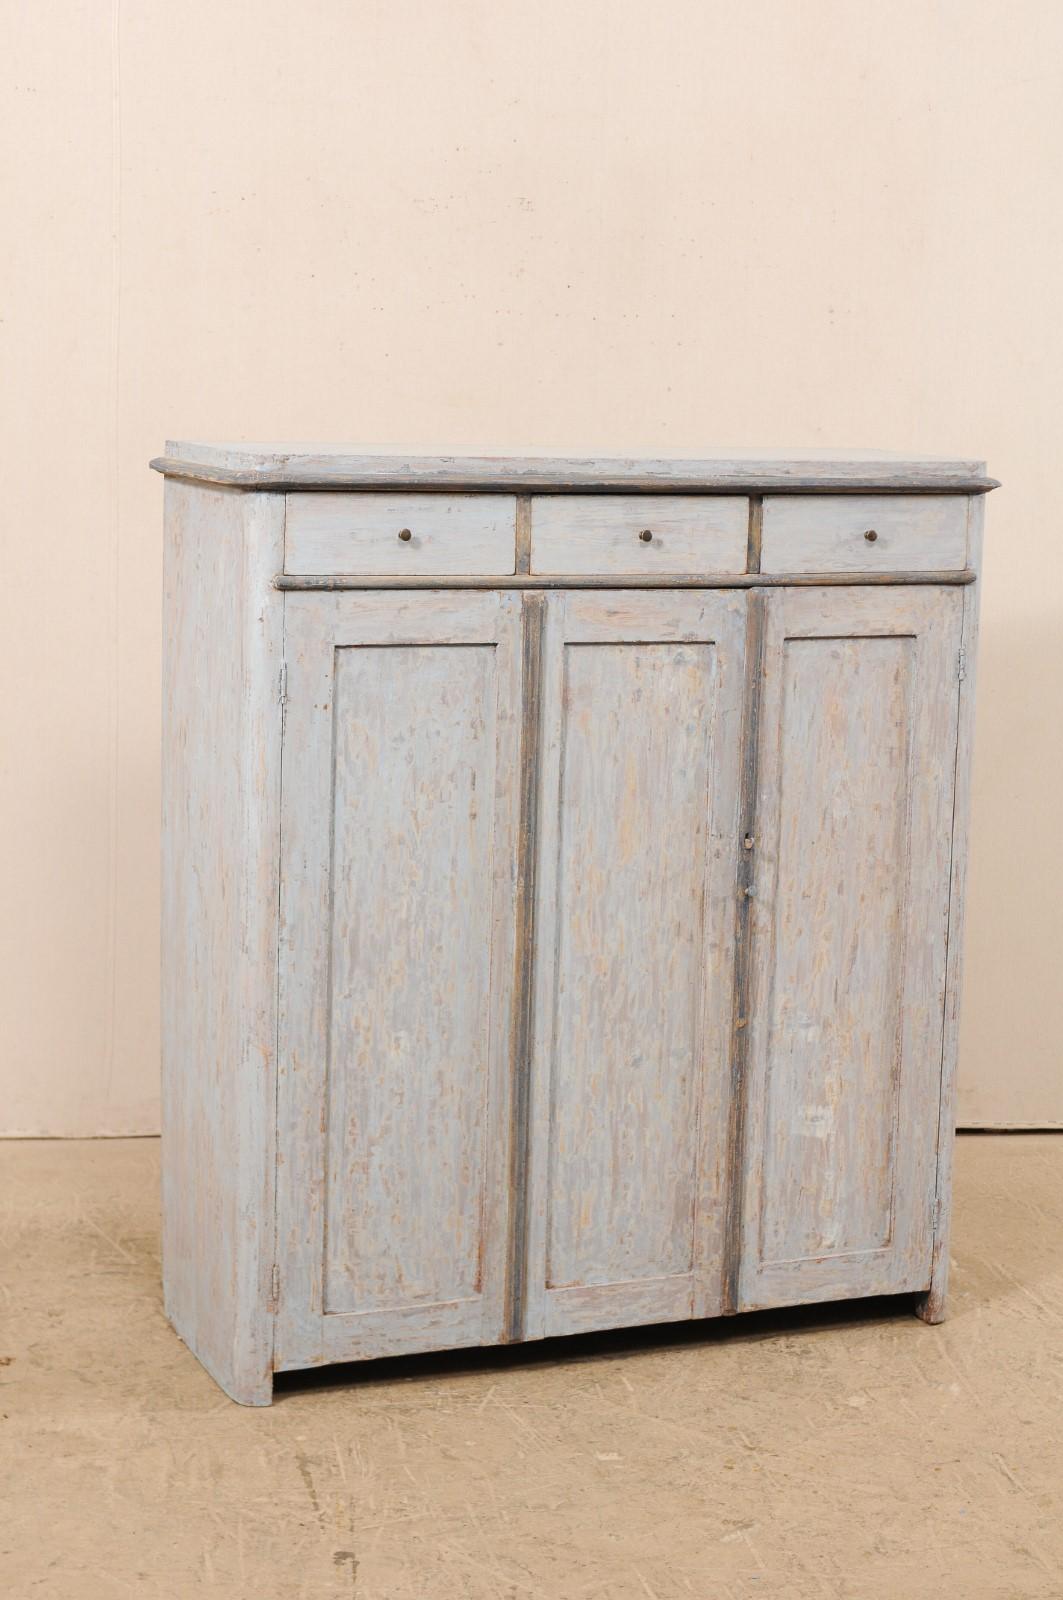 A Swedish painted wood storage cabinet from the early 19th century. This antique mid-sized cabinet from Sweden features a simple design of clean lines and has a lovely blue scraped finish, with much of the wood grain showing through, and a warmer